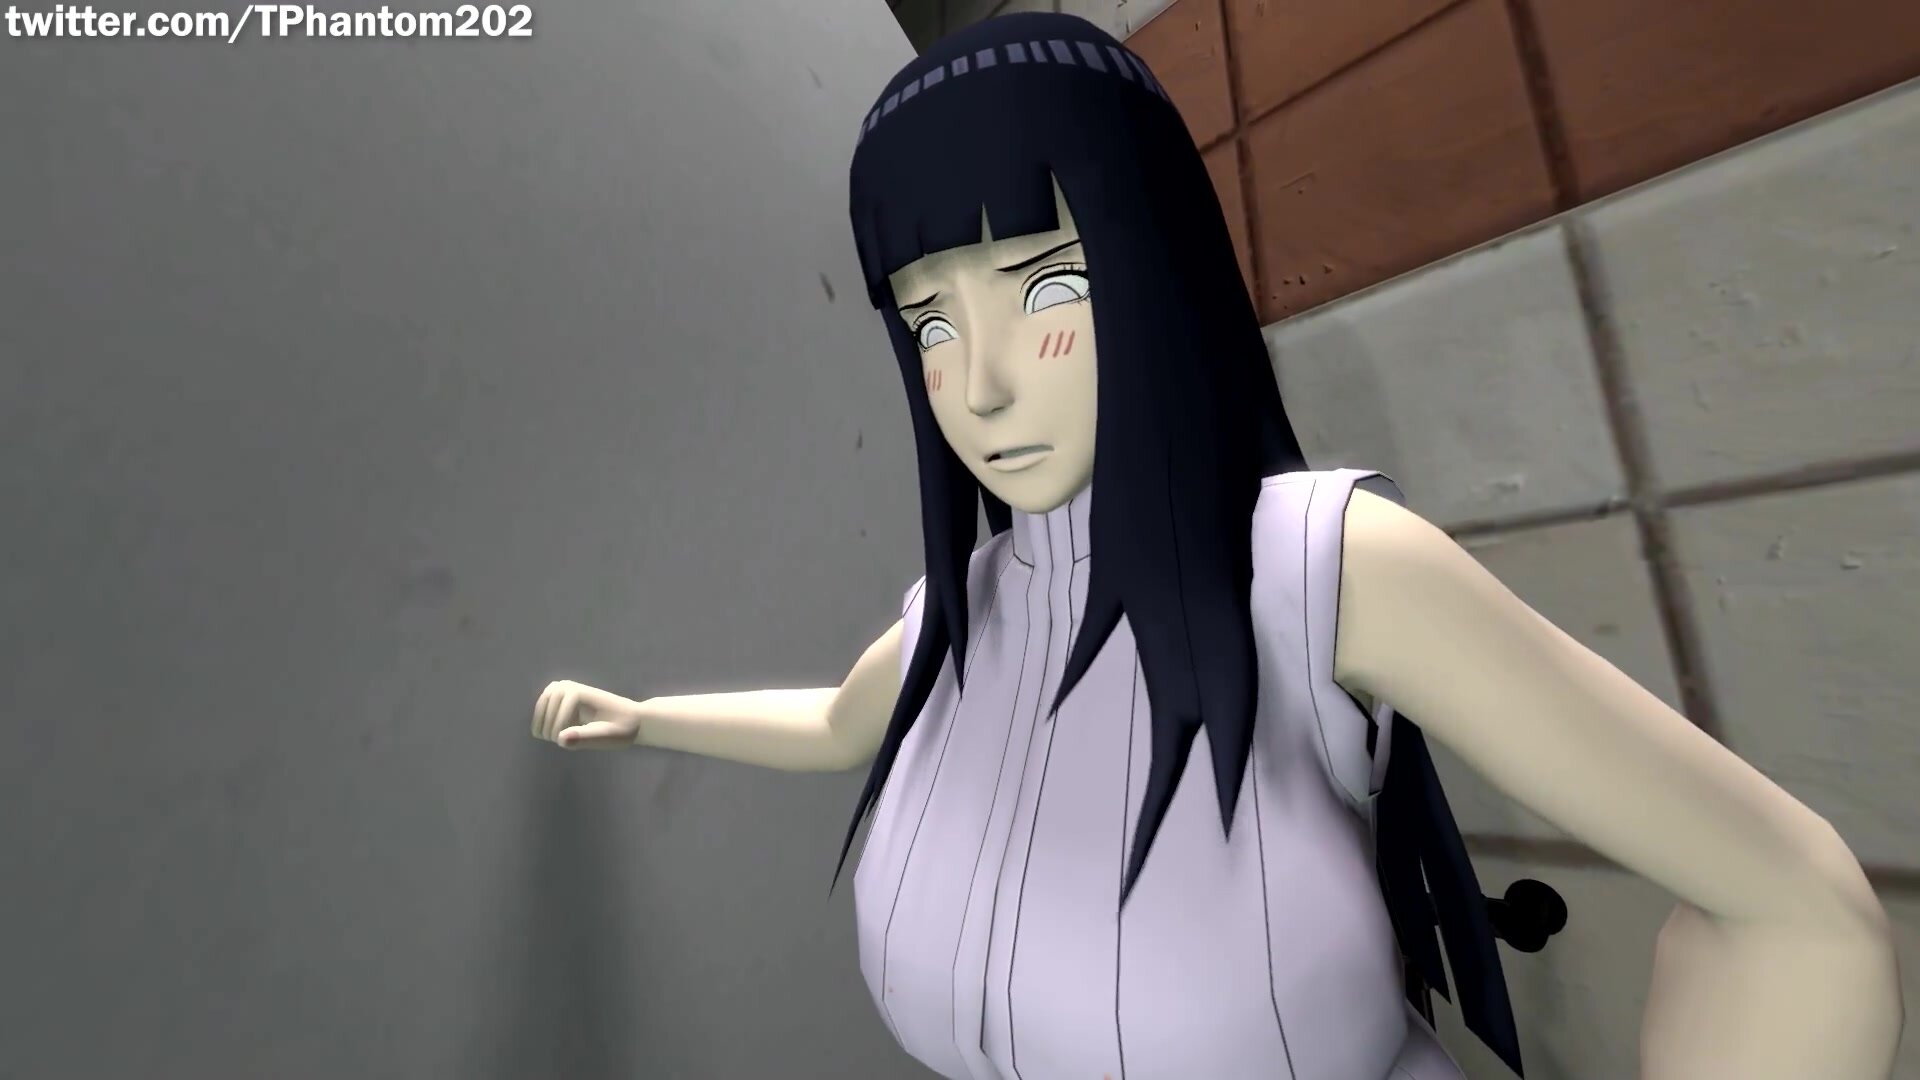 Hinata takes a huge, messy dump into a toilet